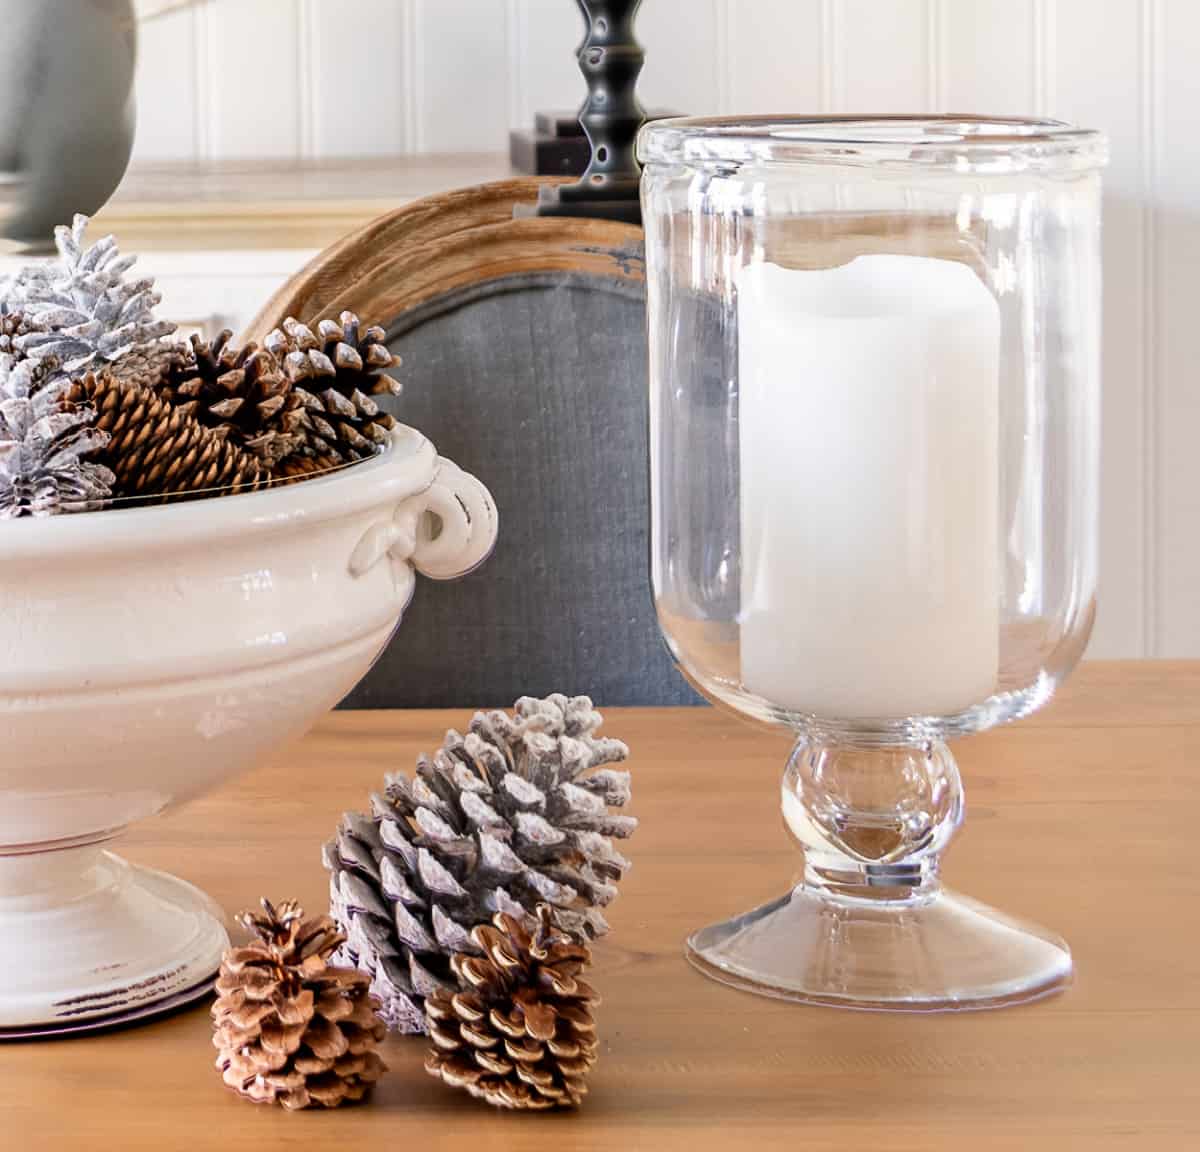 large white pedestal bowl on a dining table decorated for winter with pinecones and flanked by glass hurricanes